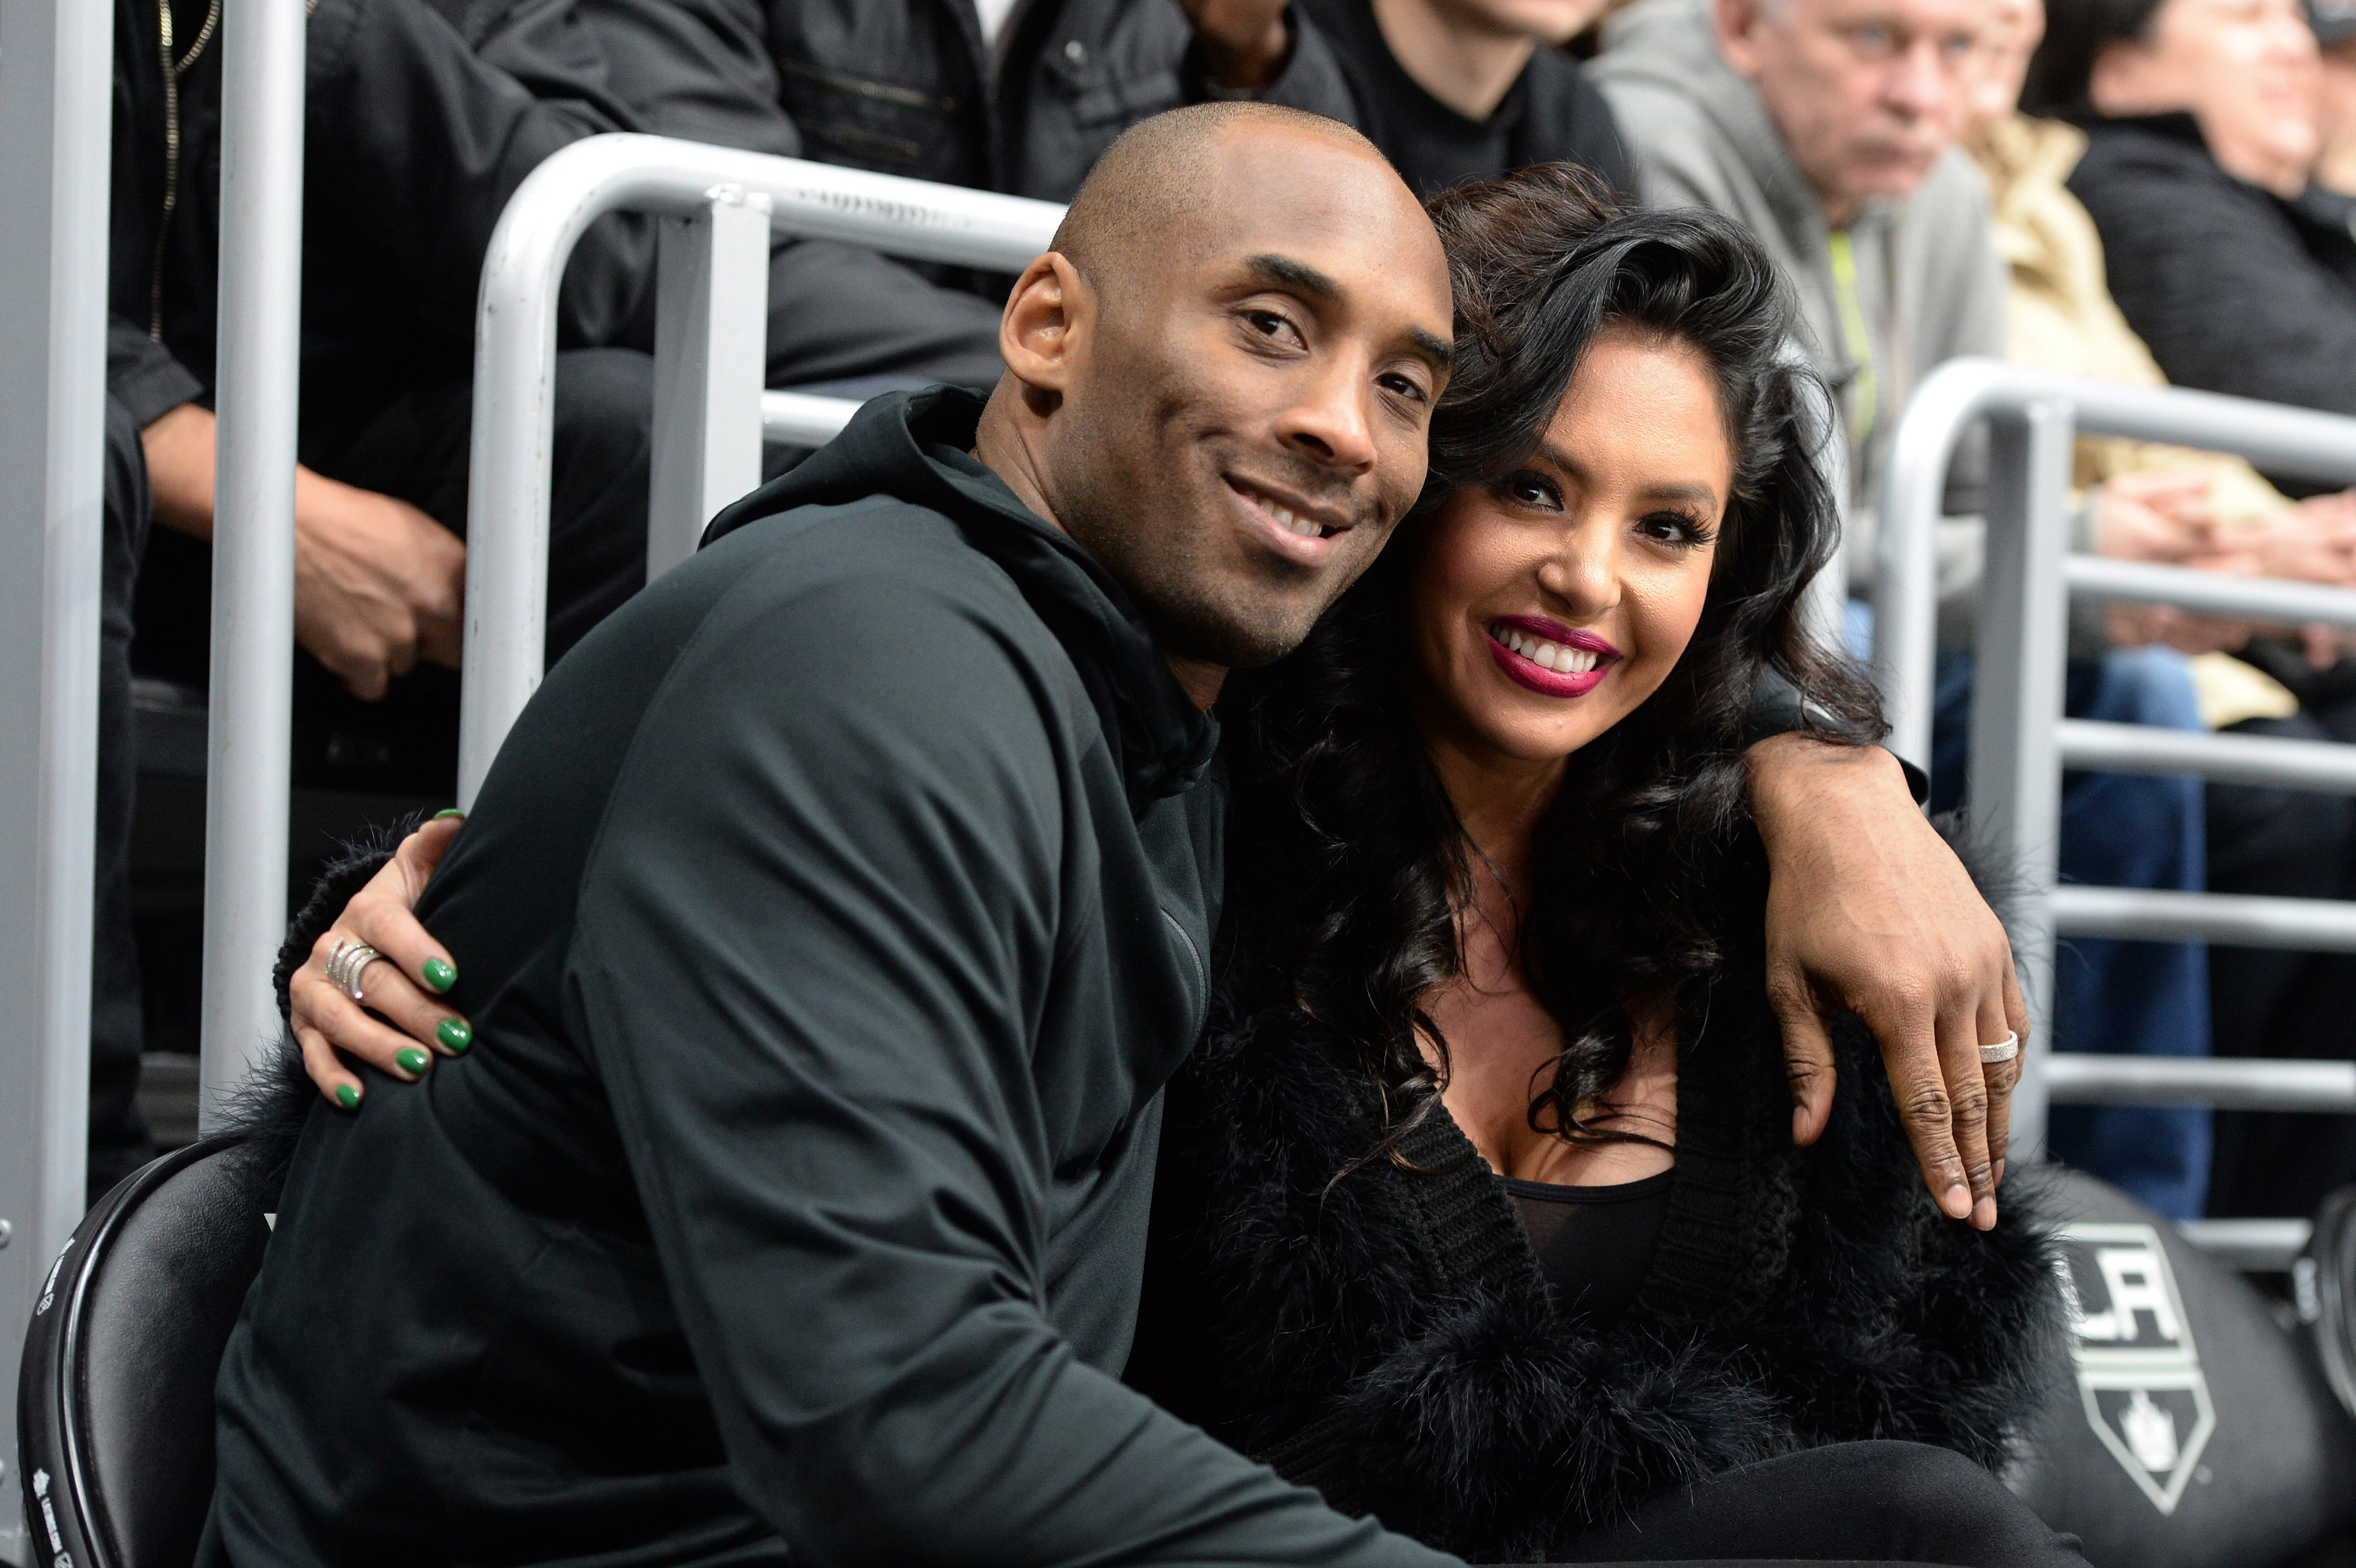 Kobe Bryant and Vanessa Bryant  at the Staples Center on March 09, 2016 l Source: Getty Images